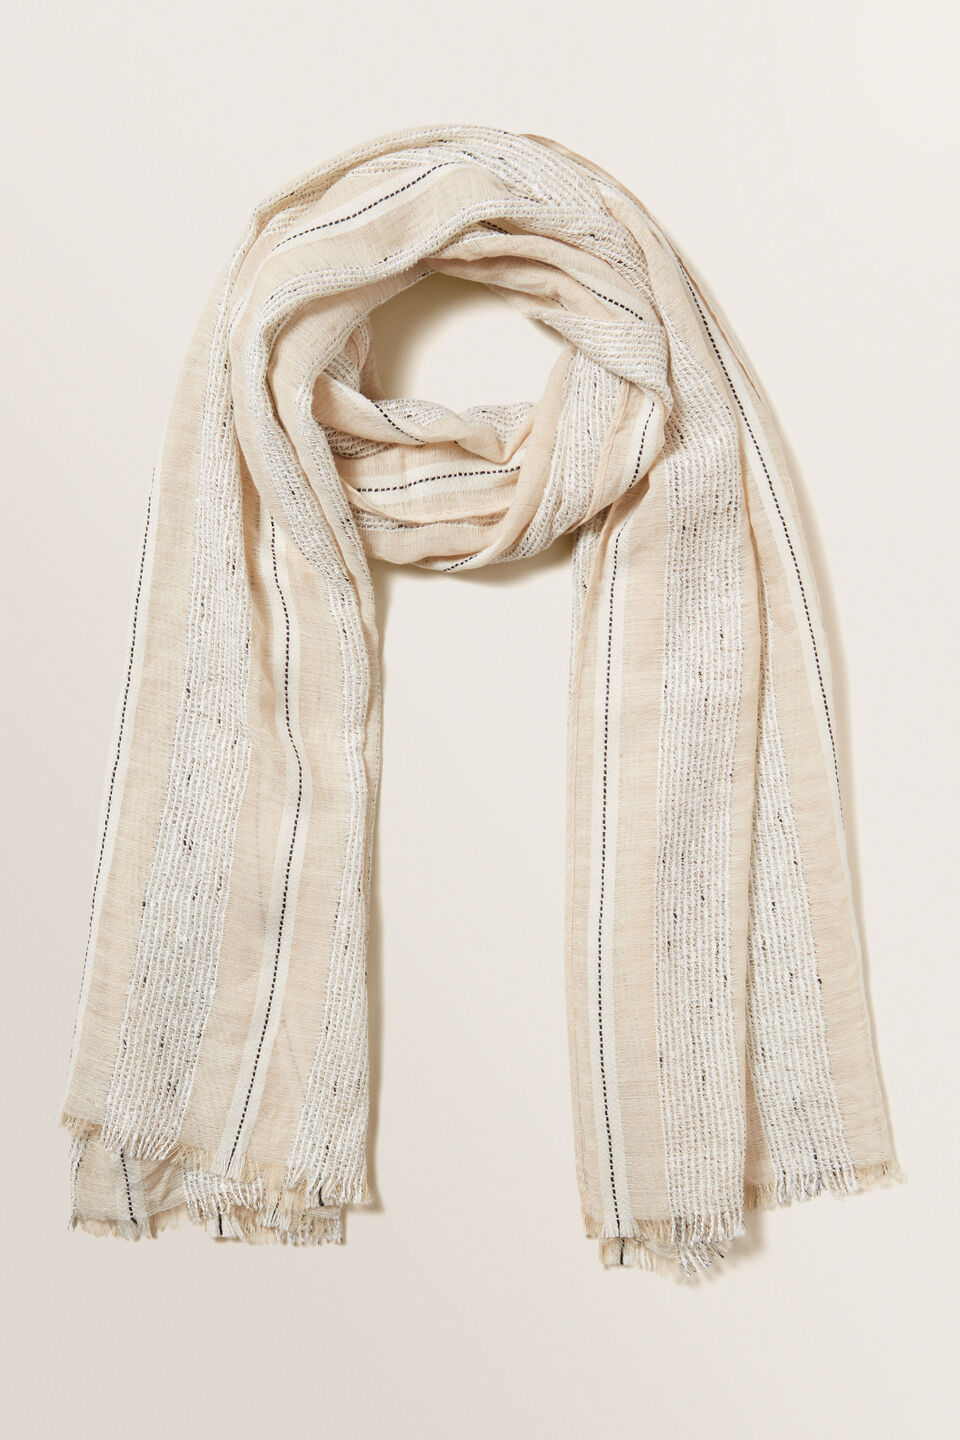 Textured Weave Scarf  Neutral Sand Multi